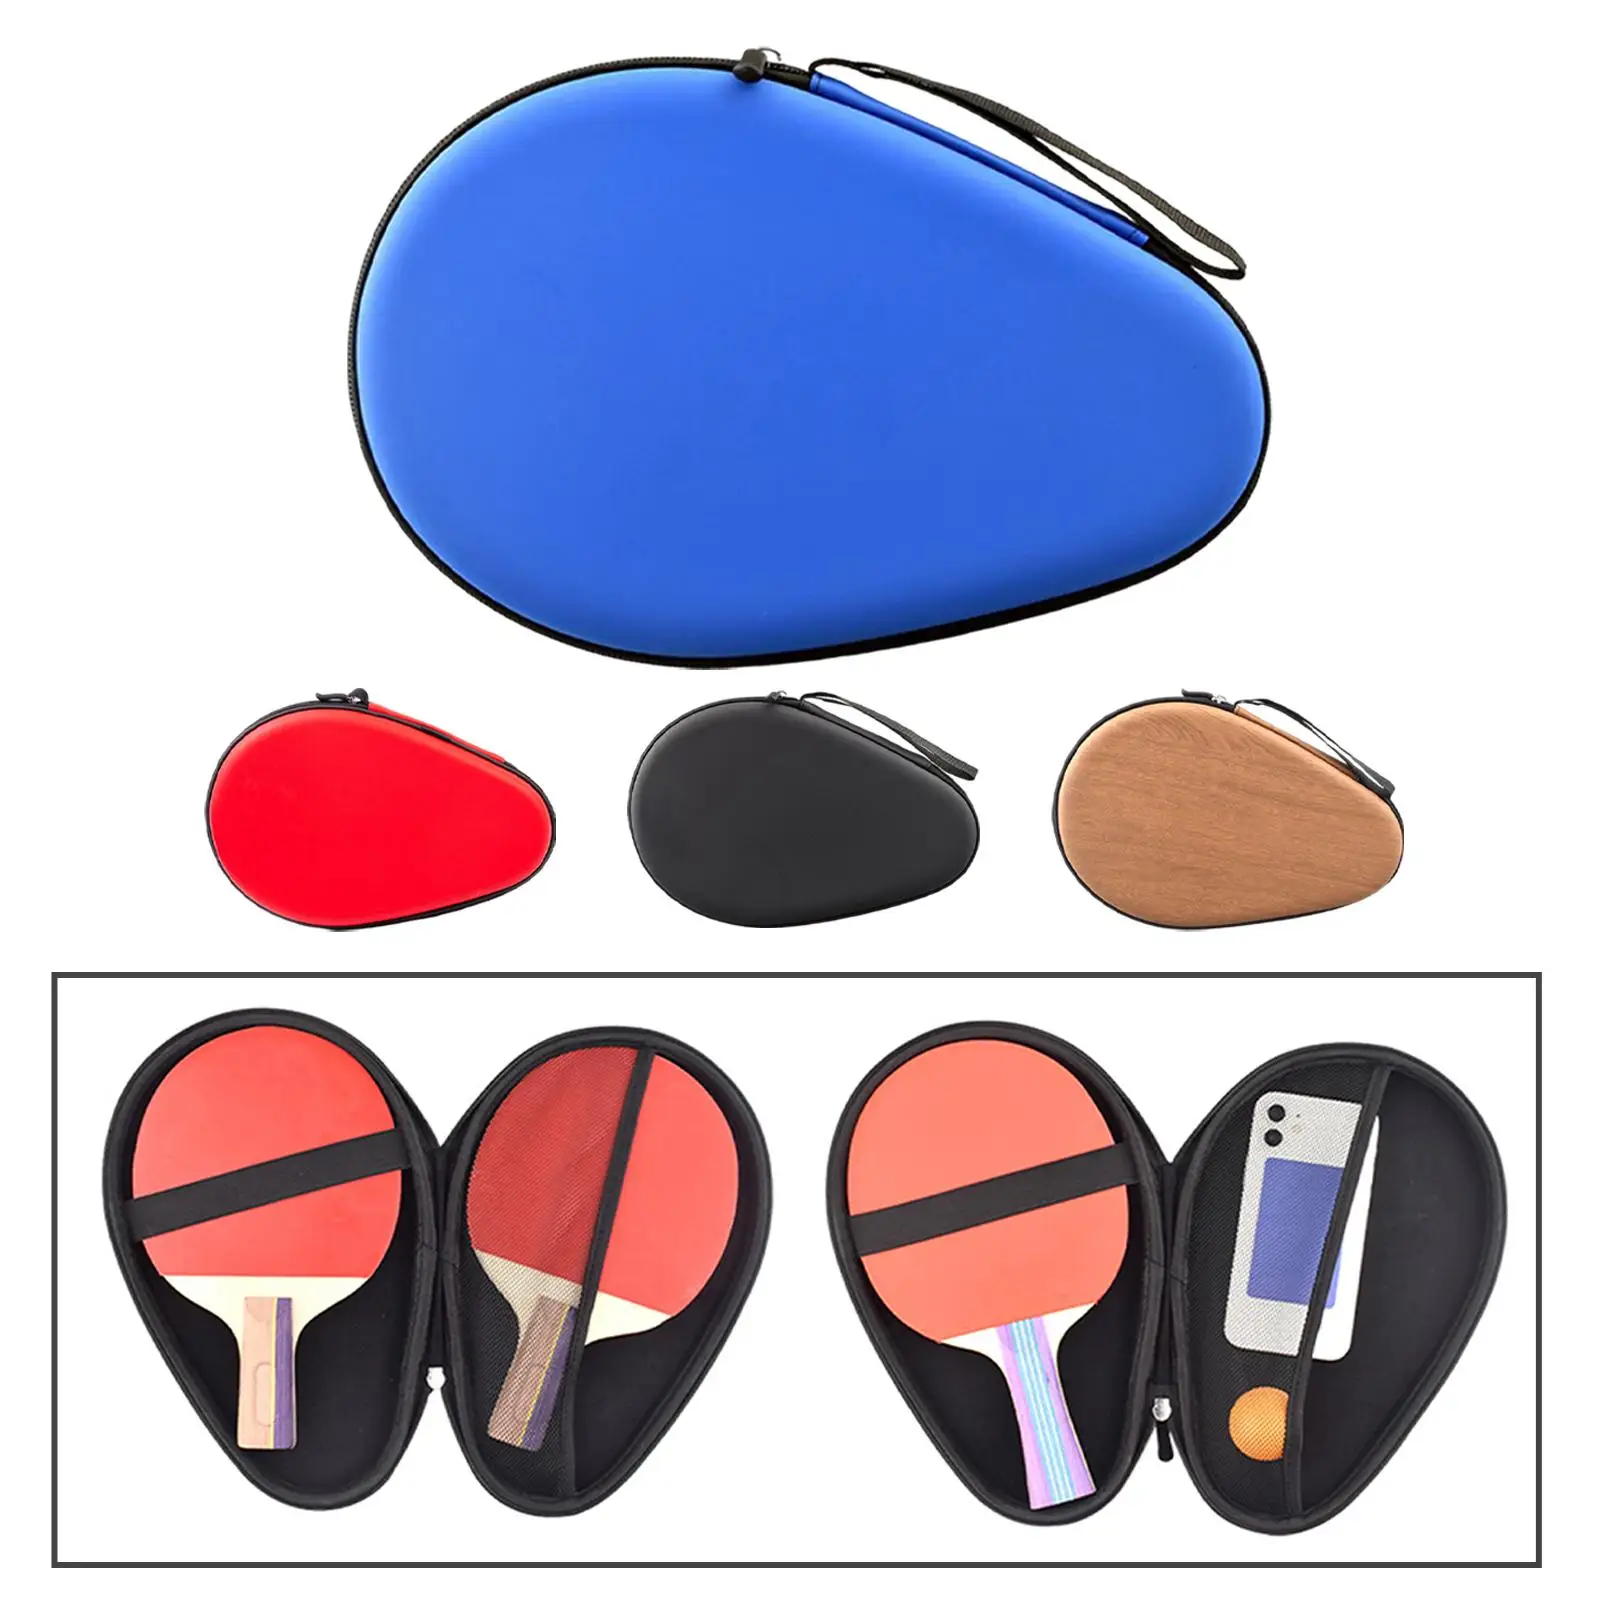 Multifunction Table Tennis Racket Case Reusable Lightweight Wear Resistant Ping Pong Paddle Bag for Competition Outdoor Training